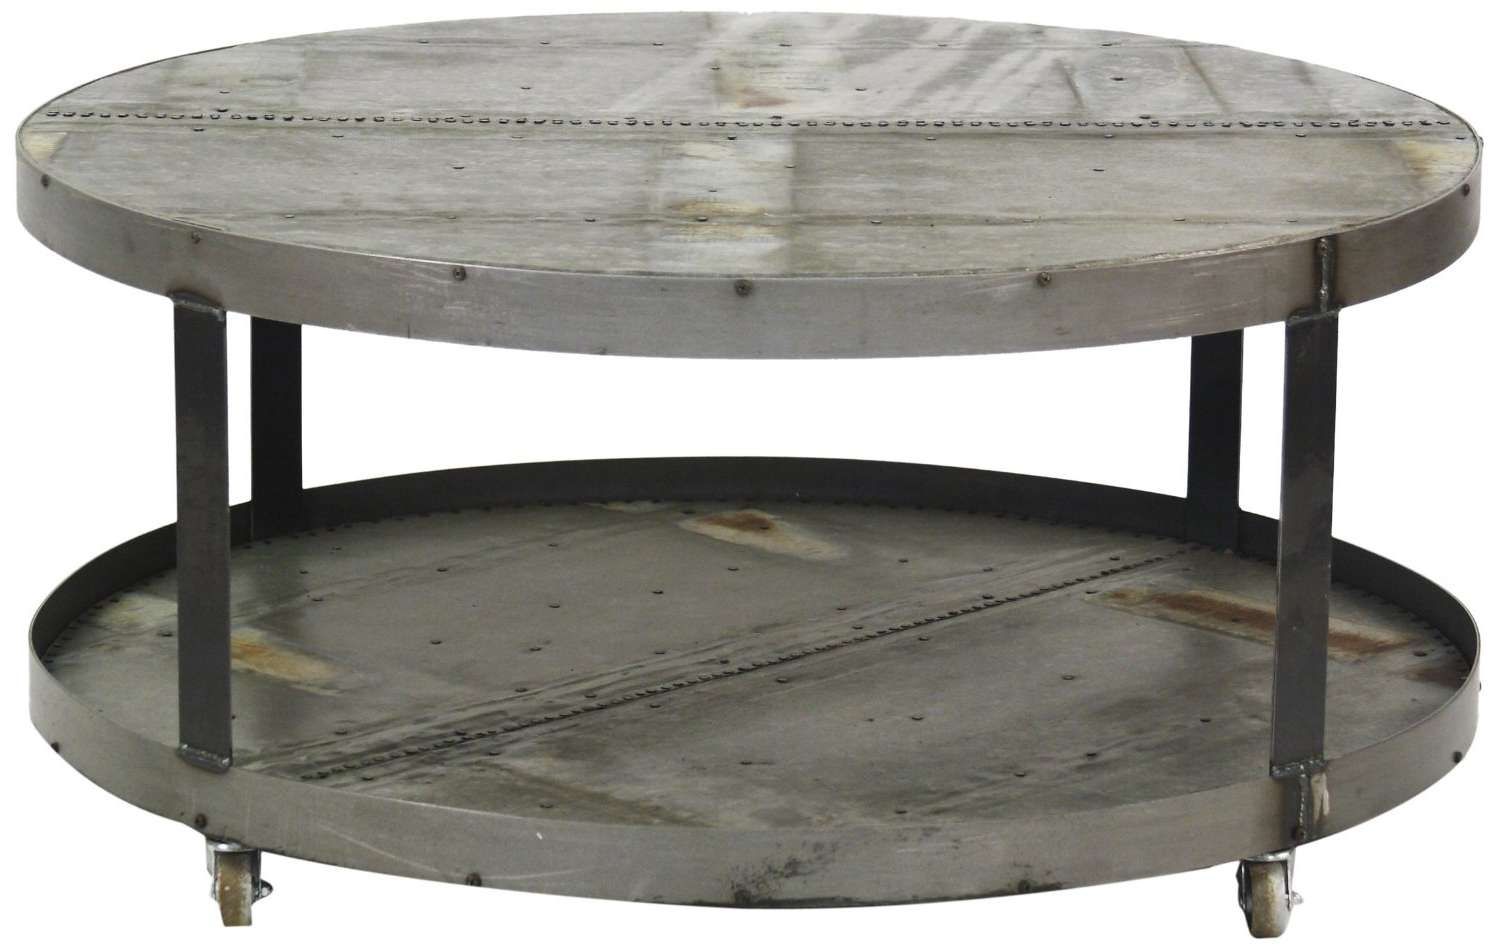 Coffee Tables : Coffee Table Wheel Design Ideas Classy Simple On Inside Fashionable Wheels Coffee Tables (View 16 of 20)